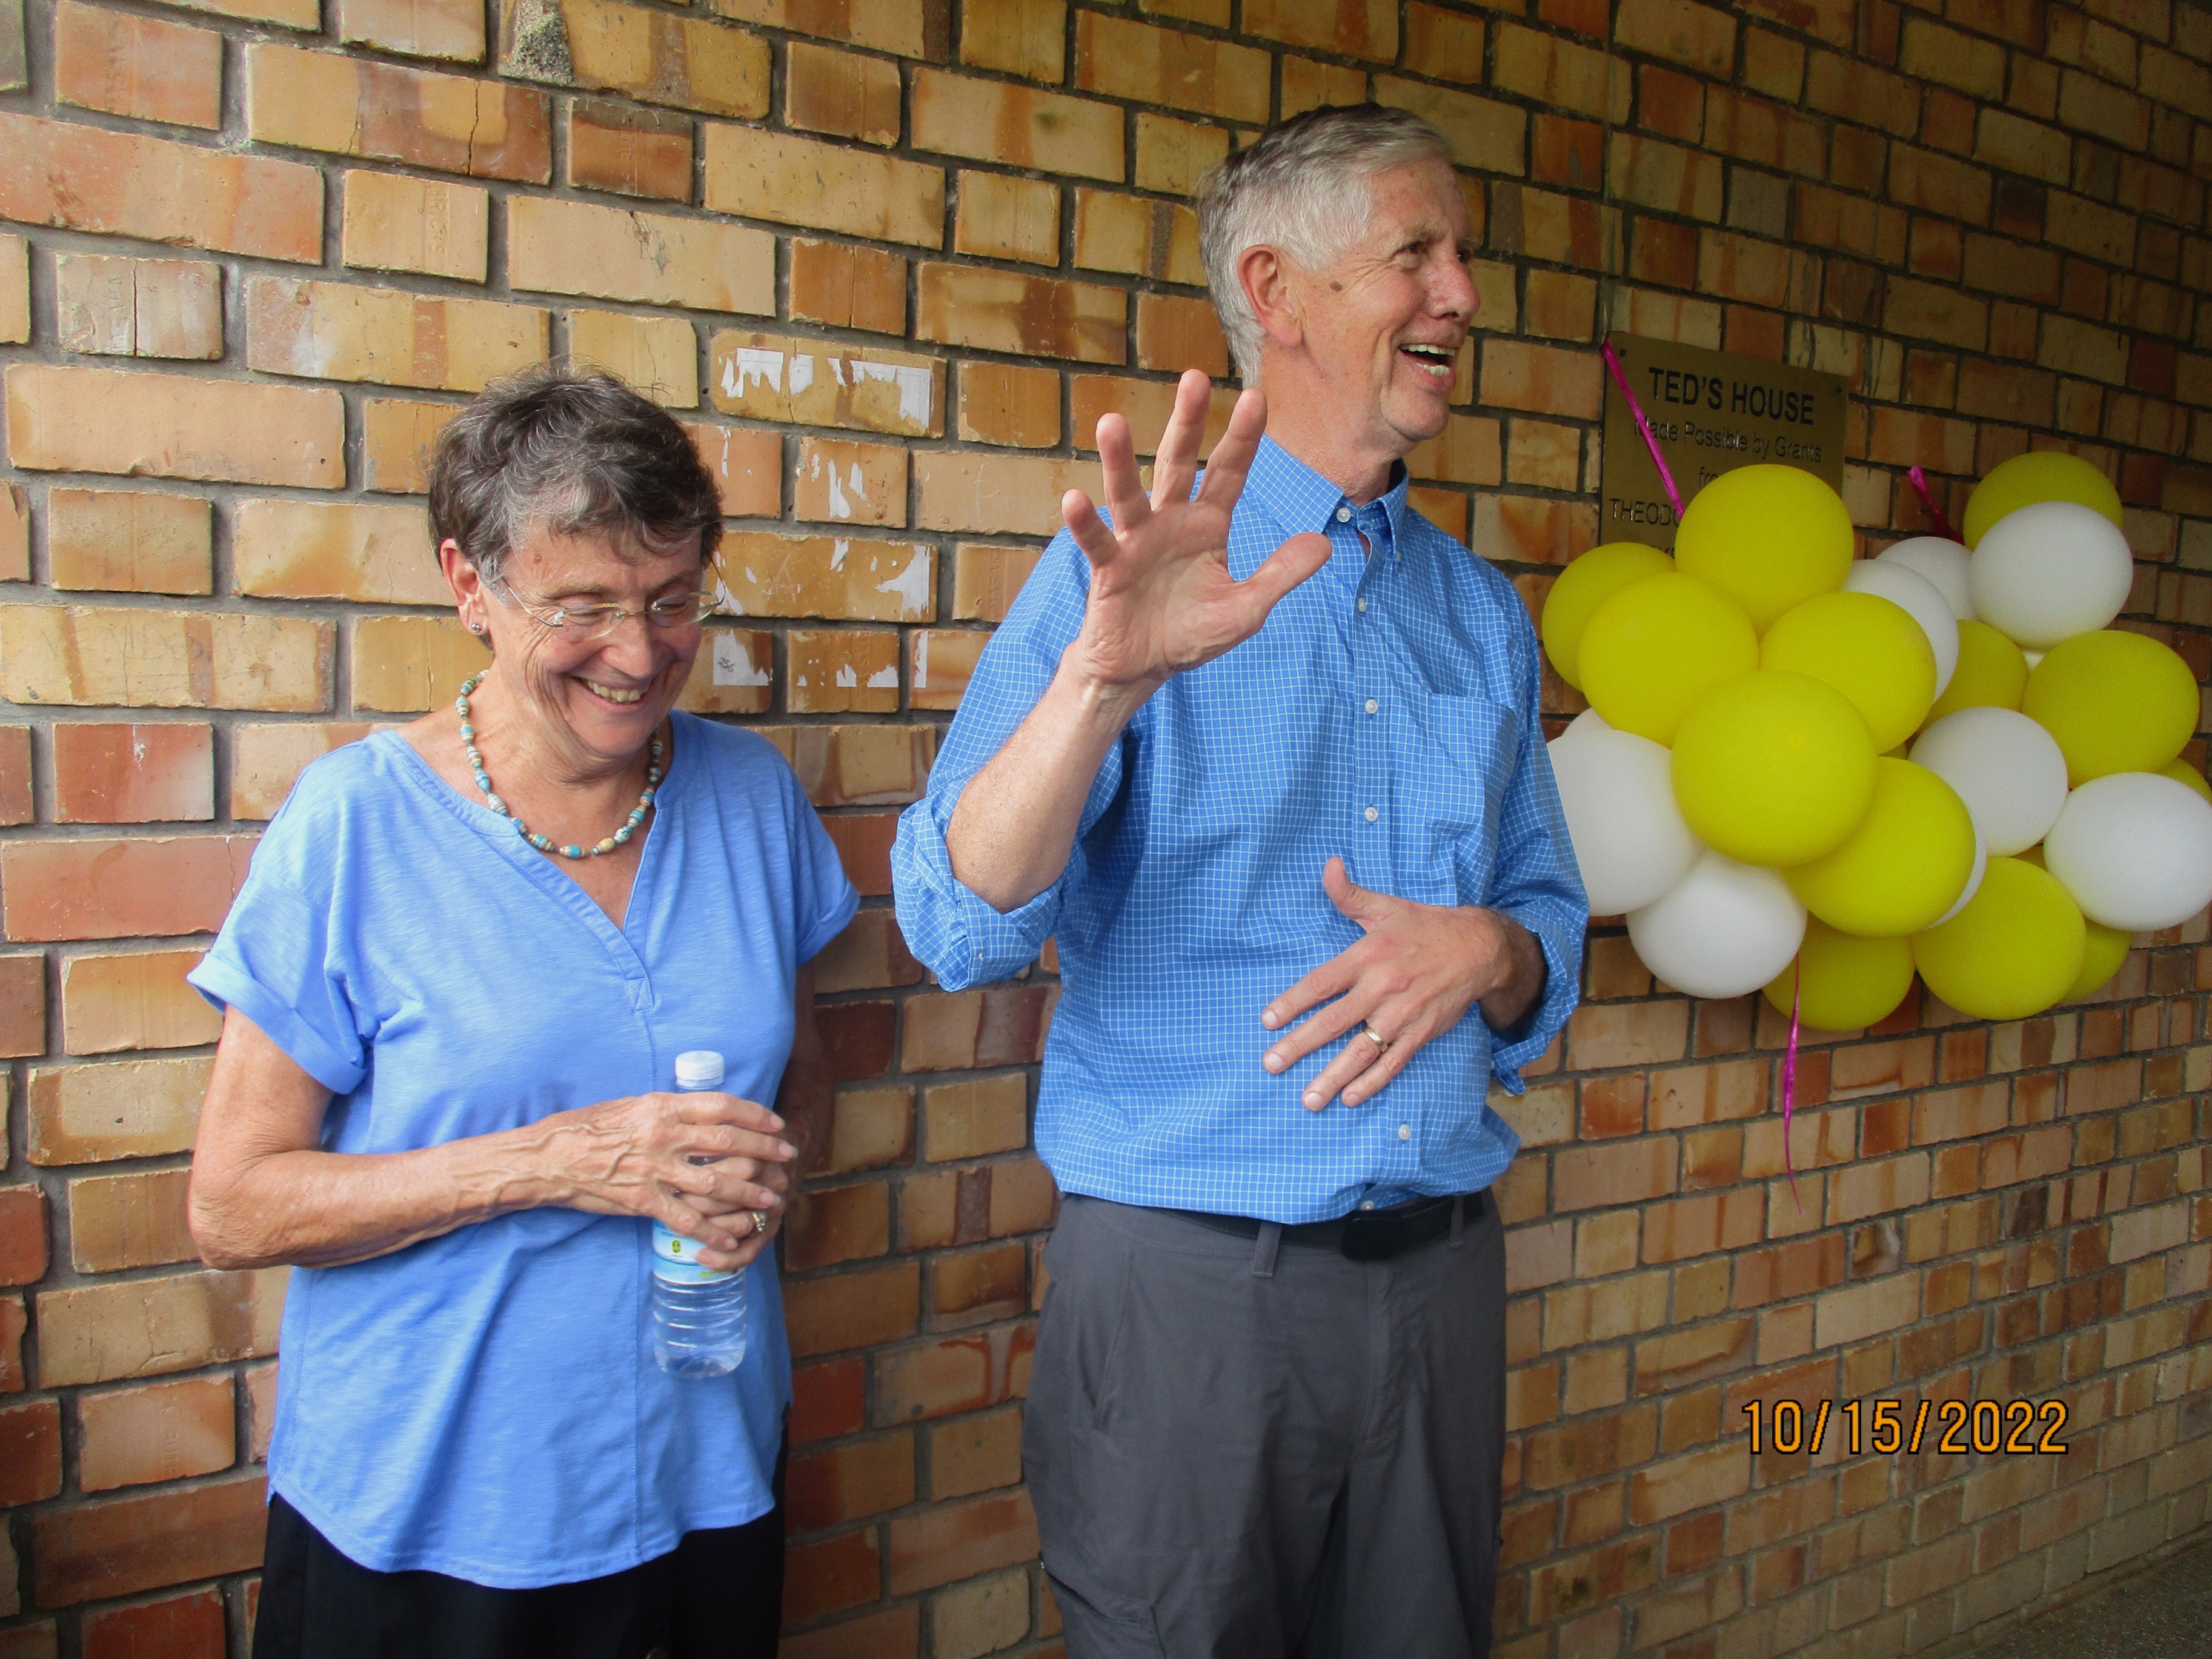 Dana and Kathryn Hiscock participating in the dedication of Ted's House, the Secondary School boys' dormitory. 